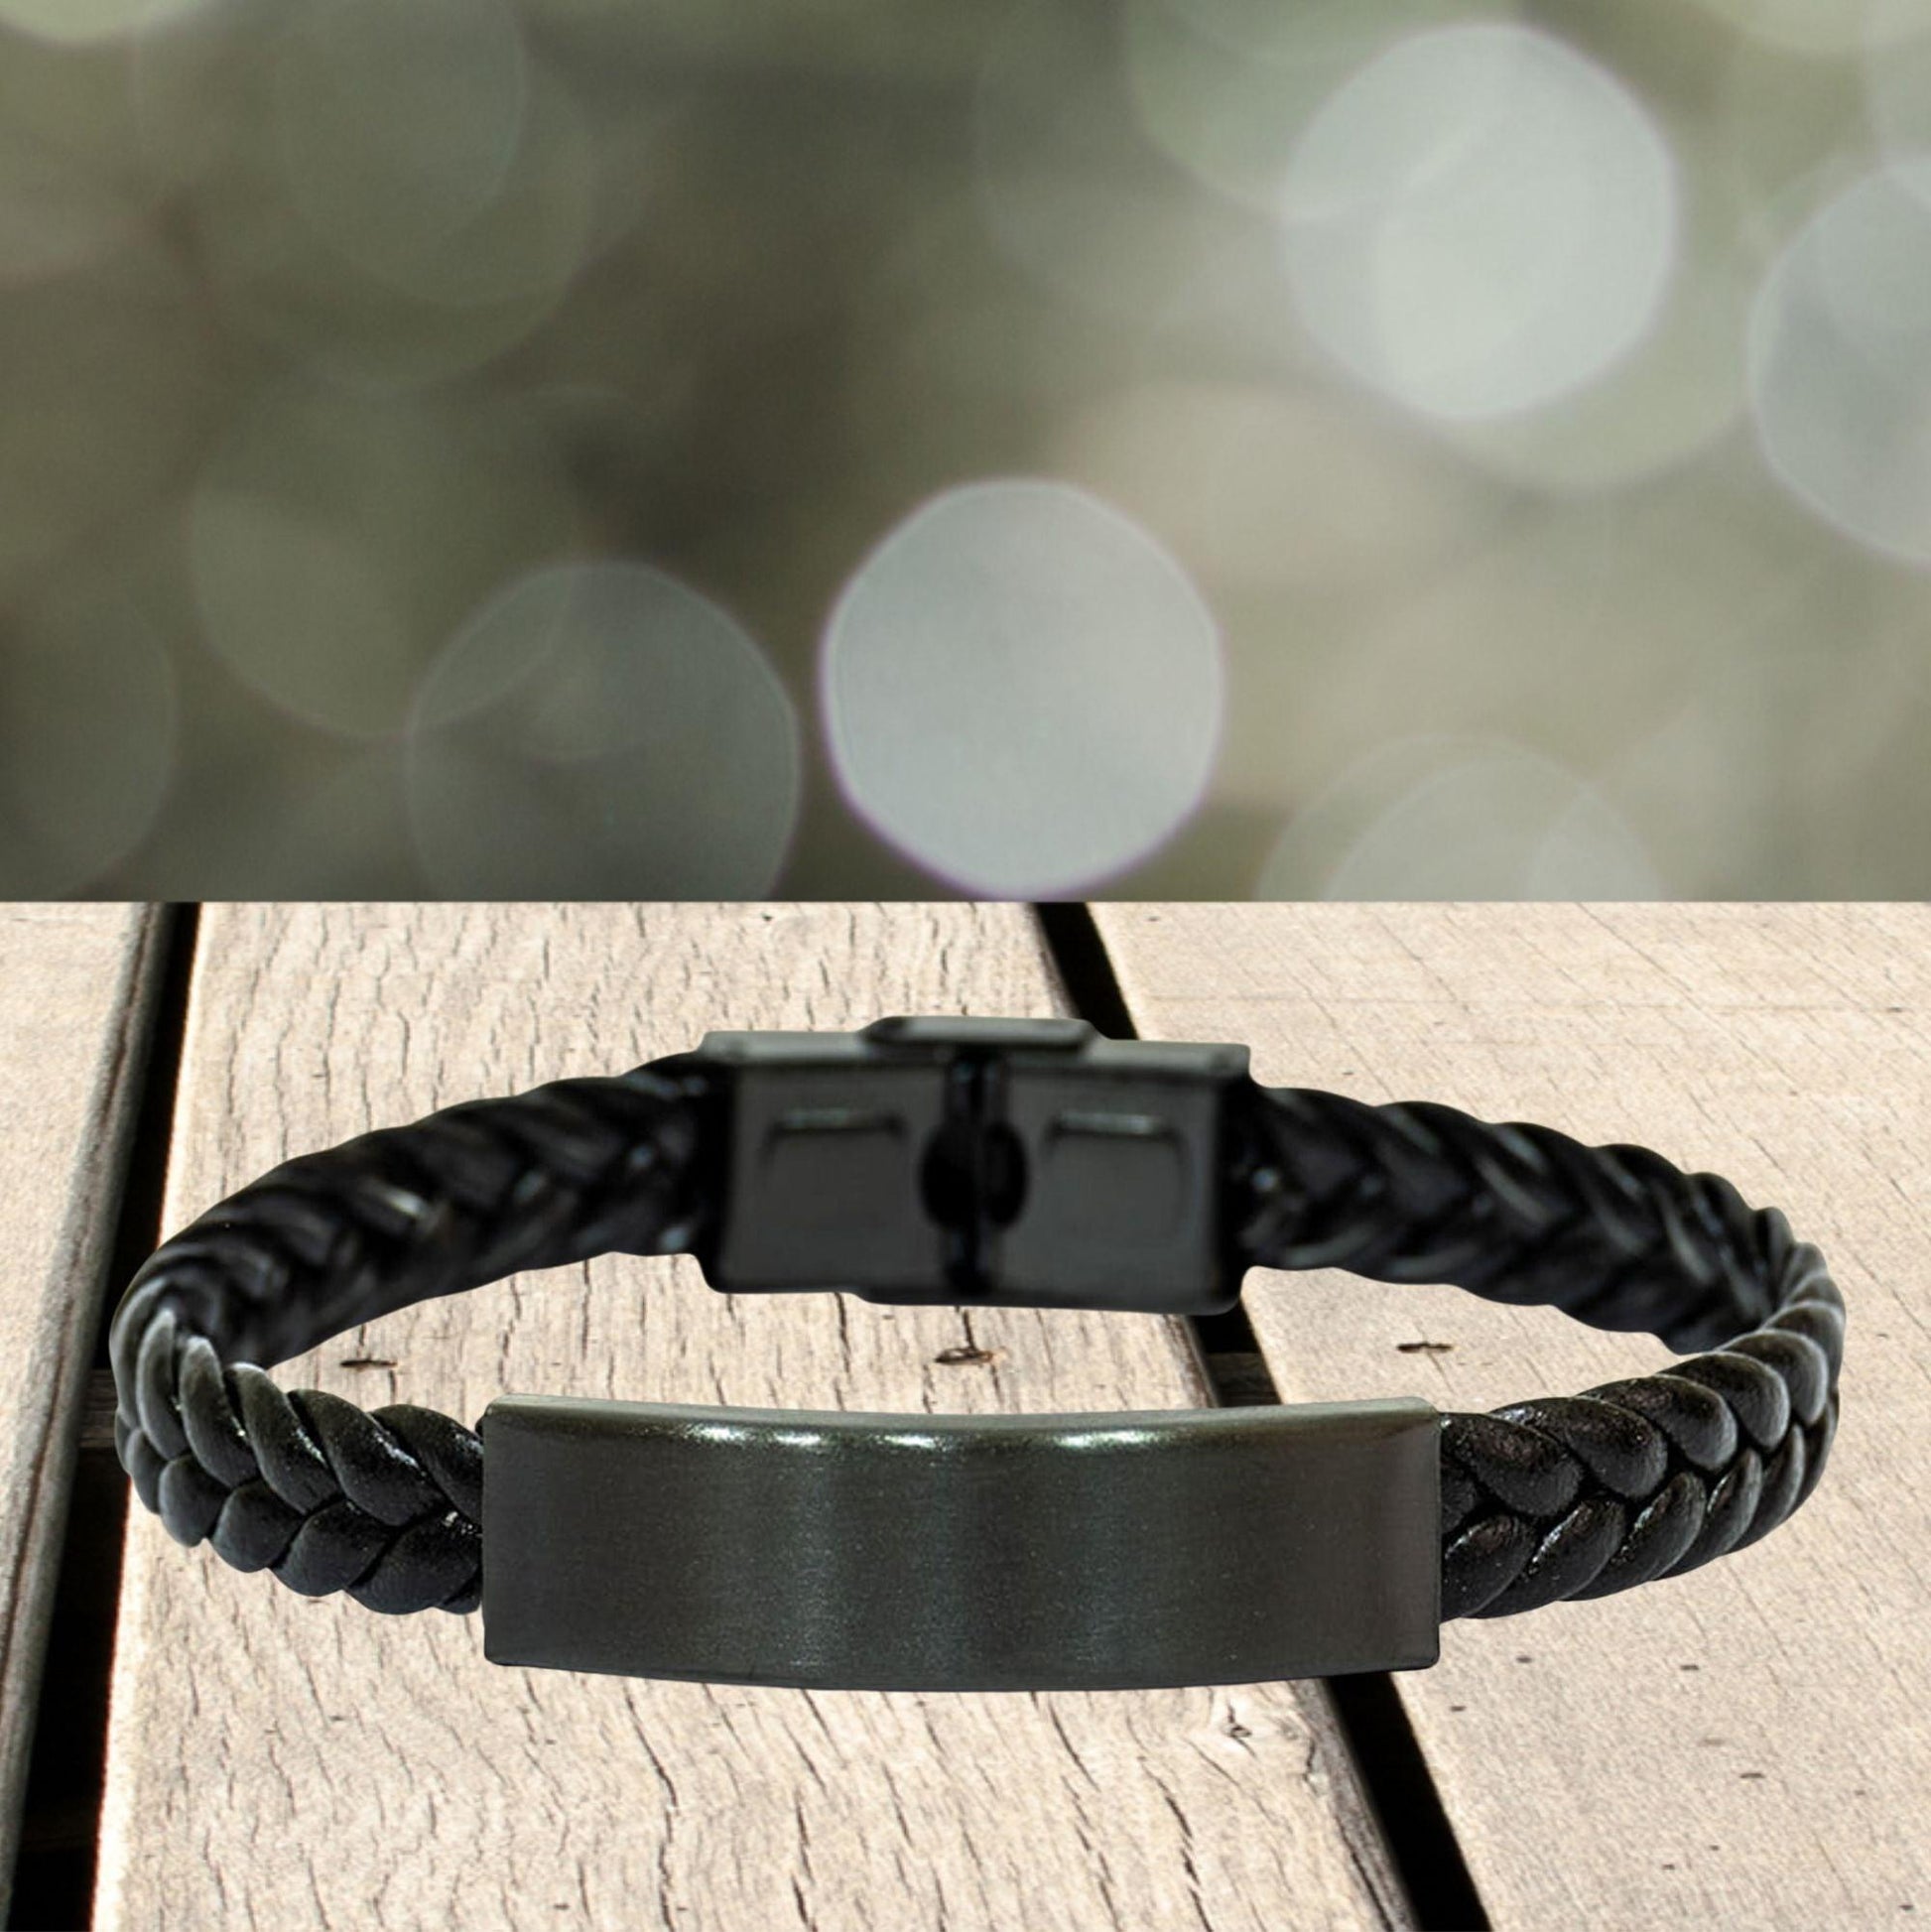 Remarkable Welder Gifts, Your dedication and hard work, Inspirational Birthday Christmas Unique Braided Leather Bracelet For Welder, Coworkers, Men, Women, Friends - Mallard Moon Gift Shop